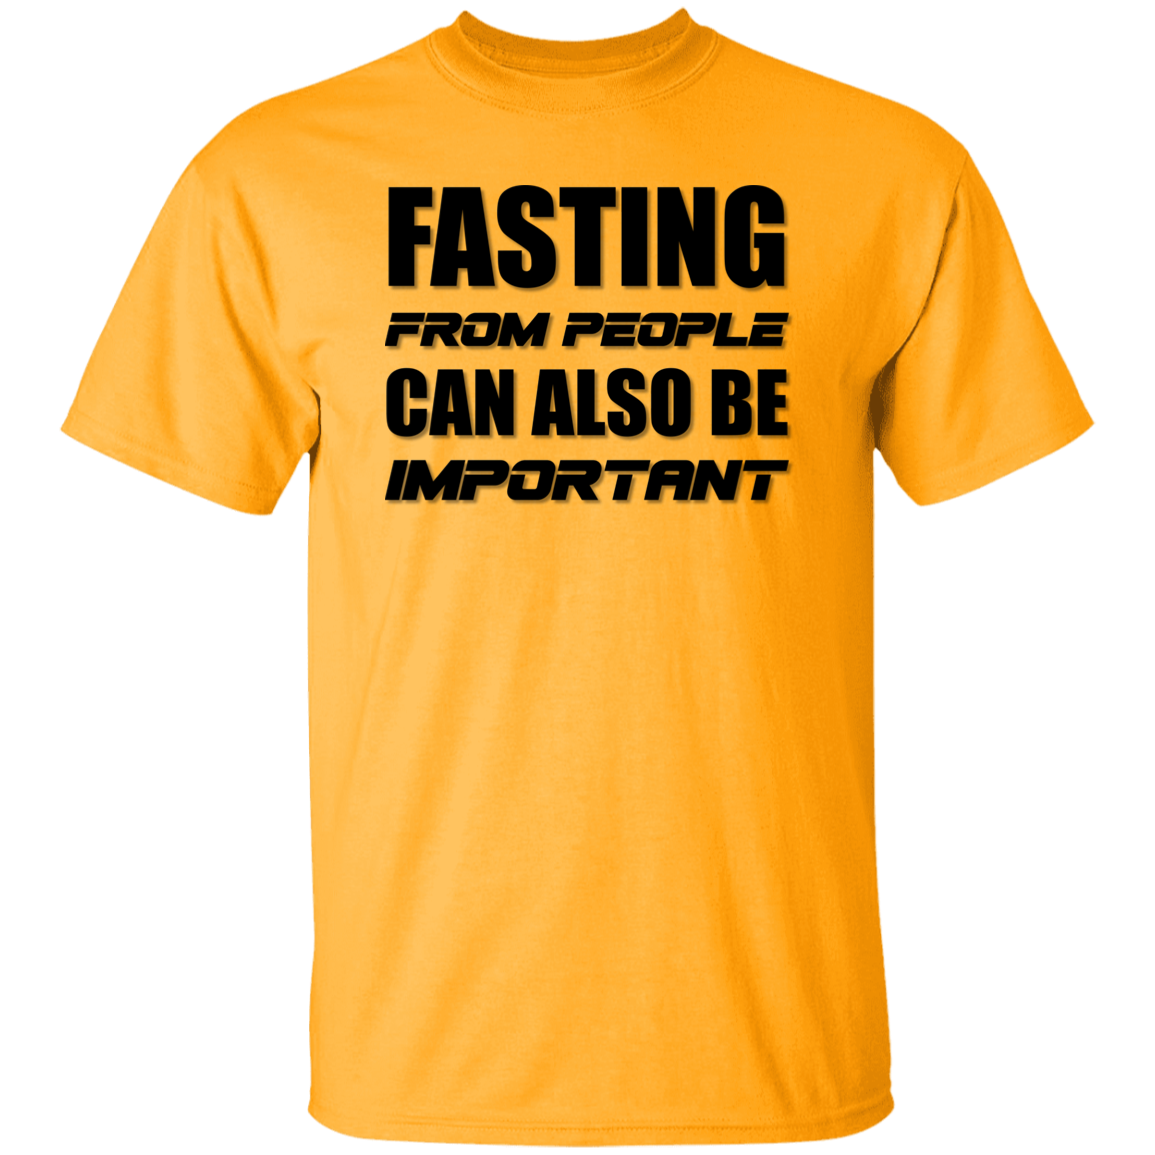 FASTING FROM PEOPLE CAN ALSO BE IMPORTANT   T-Shirt (MORE COLOR OPTIONS)